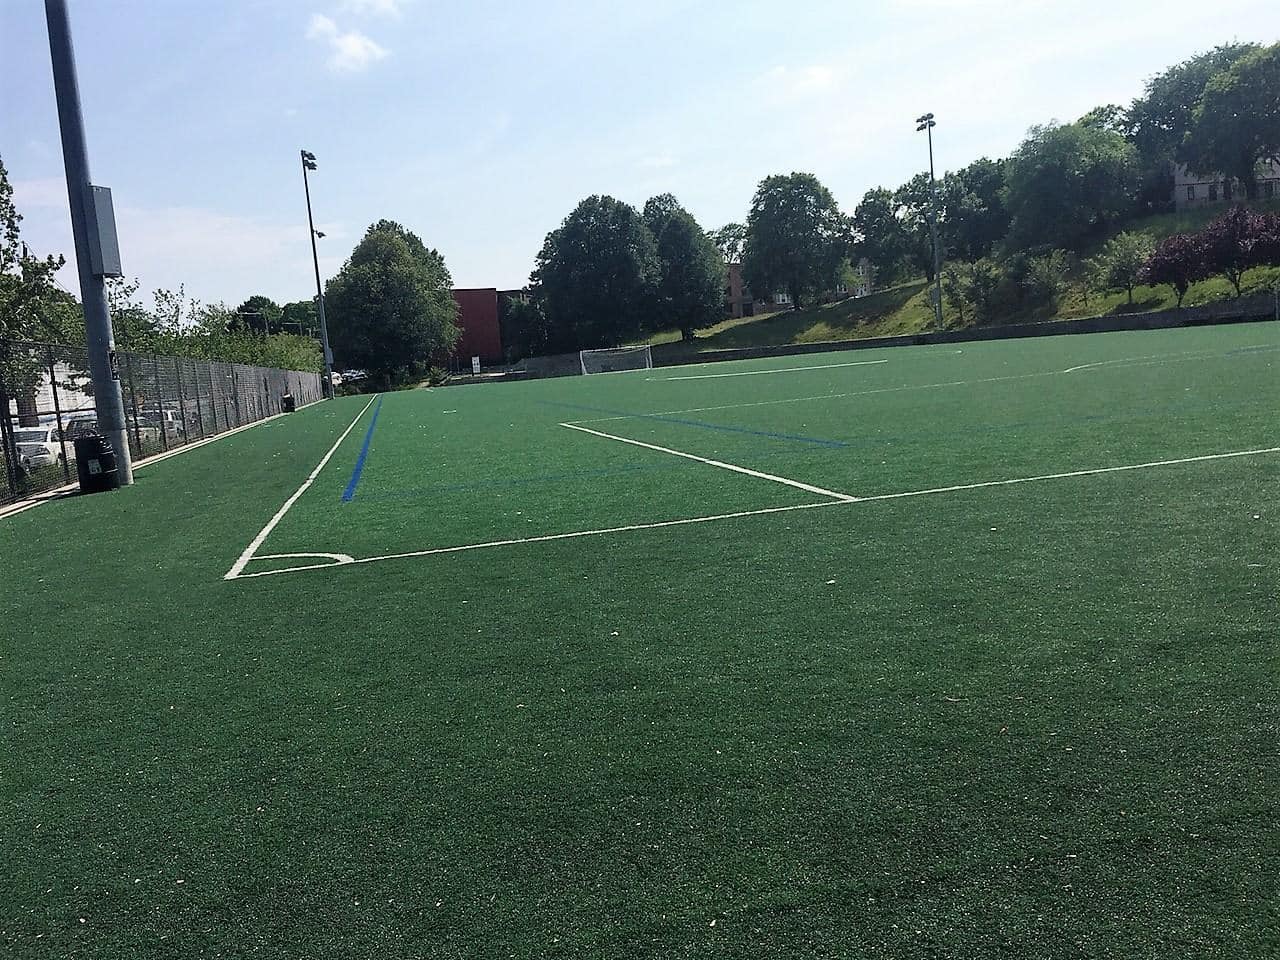 Synthetic grass, Accelerated drainage system, artificial grass, LEED, turf, landscape, drainage, golf, artificial turf, fieldturf, field turf, synthetic turf, athletic field, green roof, softball, baseball, football, soccer, futsal, lacrosse, field hockey, bocce, tee boxes, golf greens, sub-surface, sports field, forever lawn, synlawn, USGA, rooftop, shockpad, elayer, gmax, hic, foreverlawn, astro turf, prograss, newgrass, geocell, geo cell, geogrid, geo grid, shock pad, usgbc, asla, aia, green building, batting cages, batting cage, bullpen, bullpens, airdrain geocell, Artificial Turf, Soccer, Baseball, Super Bowl, NCAA, AirField Systems, Sports Field Drainage, Athletic Field Drainage, Baseball field Drainage, Football Field Drainage, Soccer field Drainage, Lacrosse field Drainage, turf performance field, airdrain, air drain, air grid, airgrid, paved court converted to turf